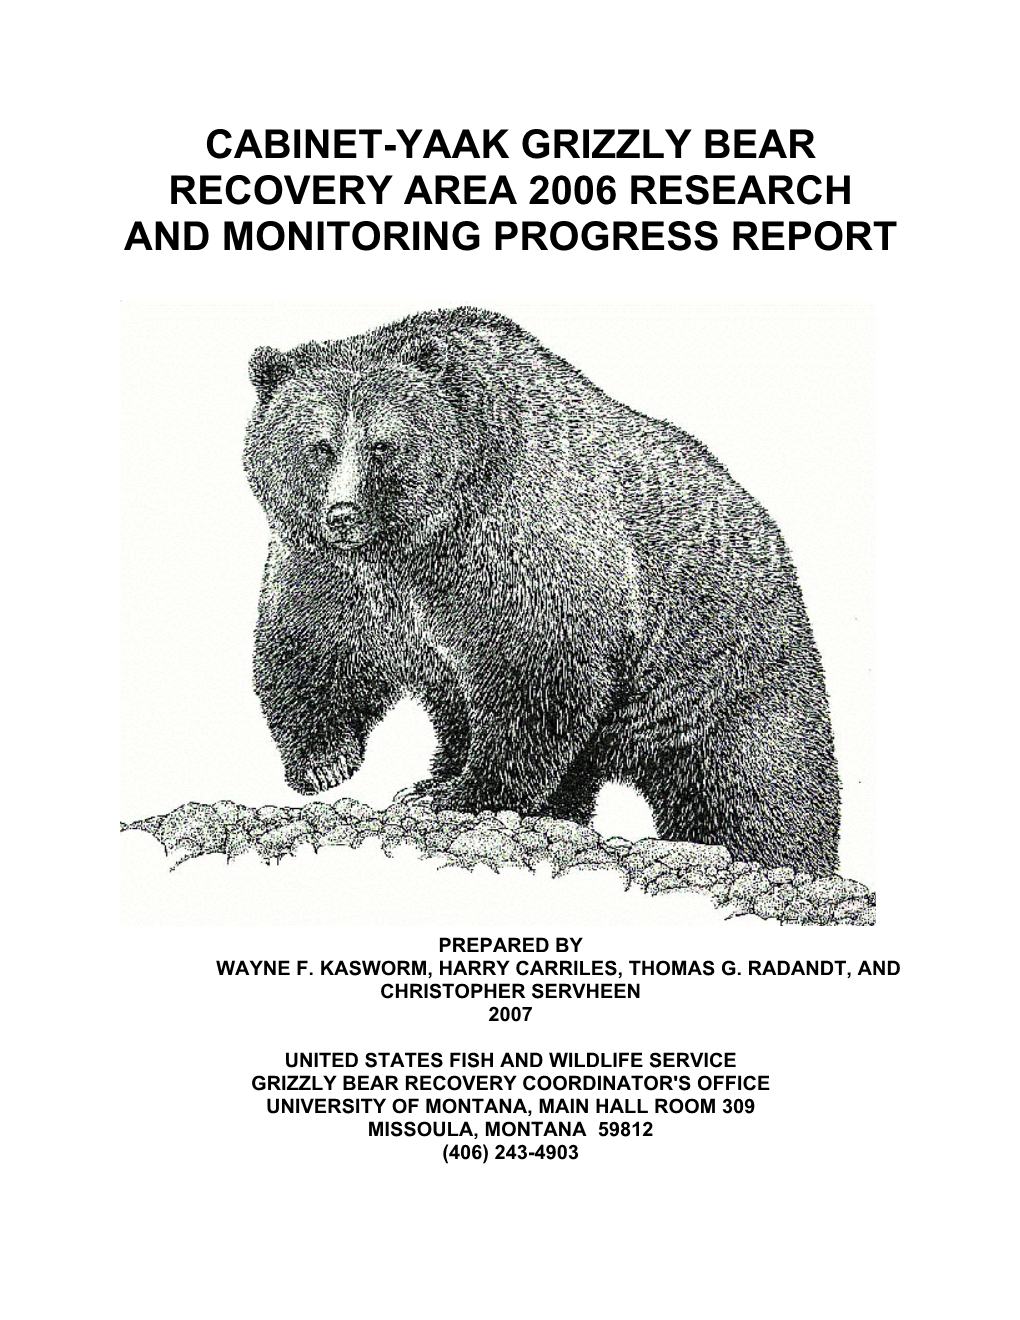 Cabinet-Yaak Grizzly Bear Recovery Area 2006 Research and Monitoring Progress Report